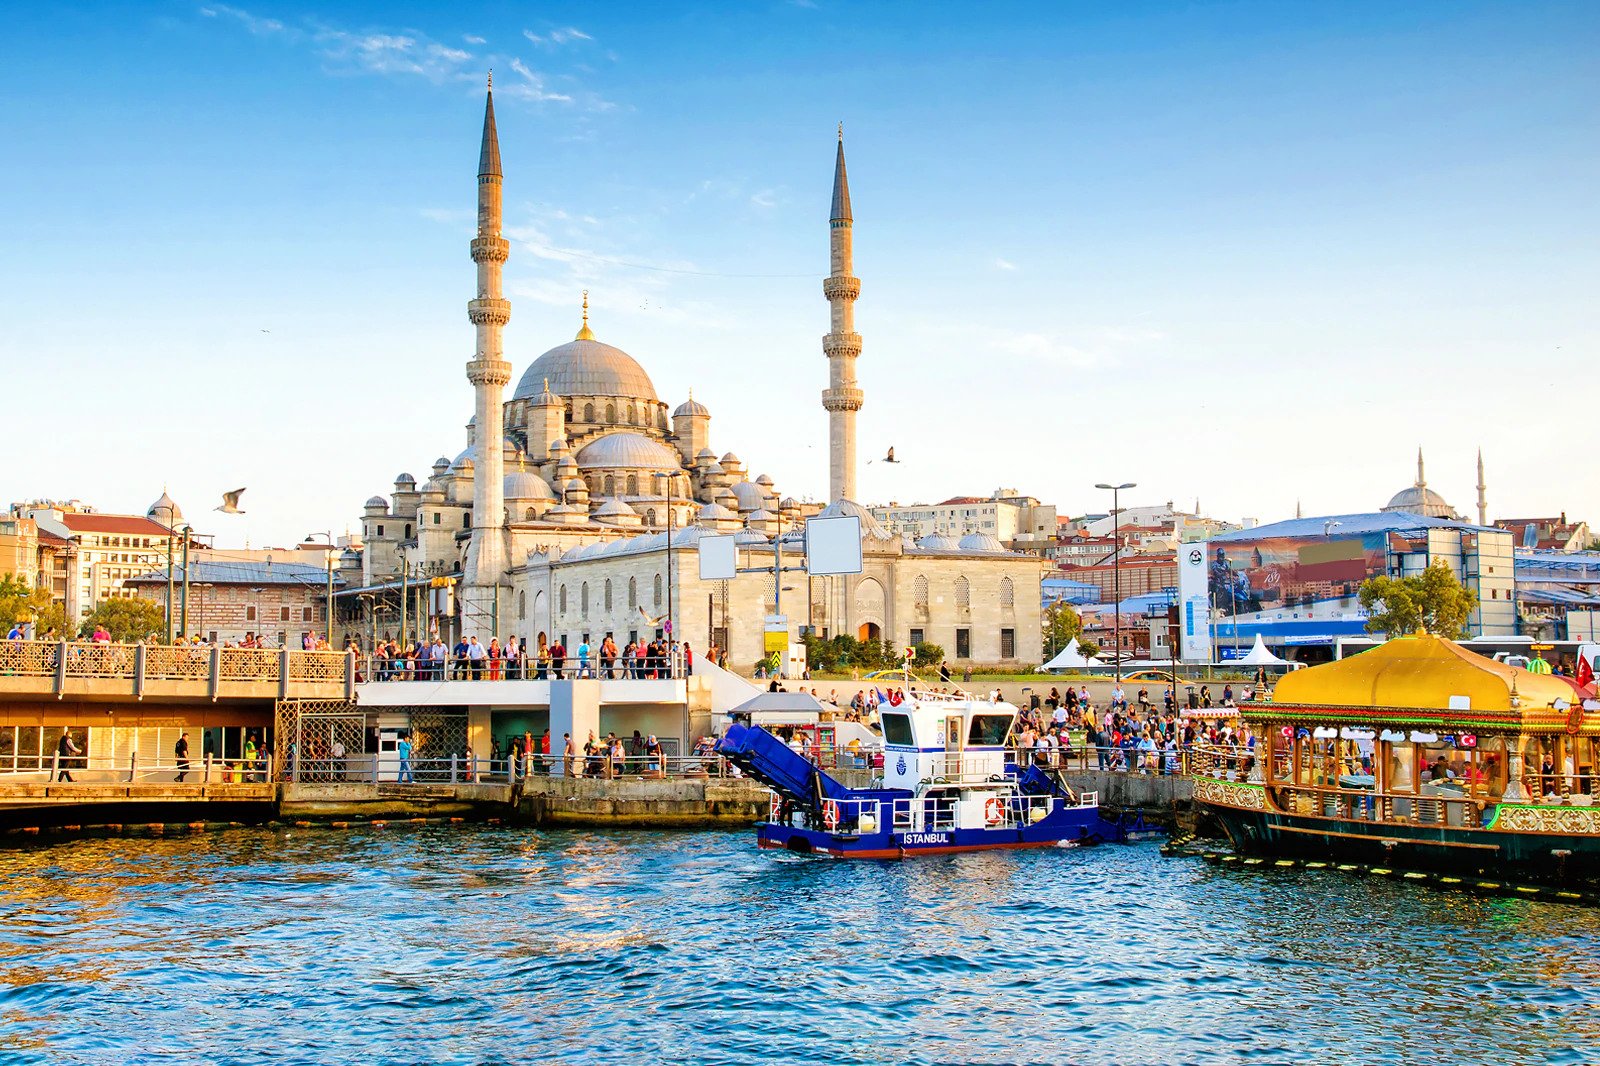 St. Sophia Mosque is one of the great architectural marvels of the ancient world